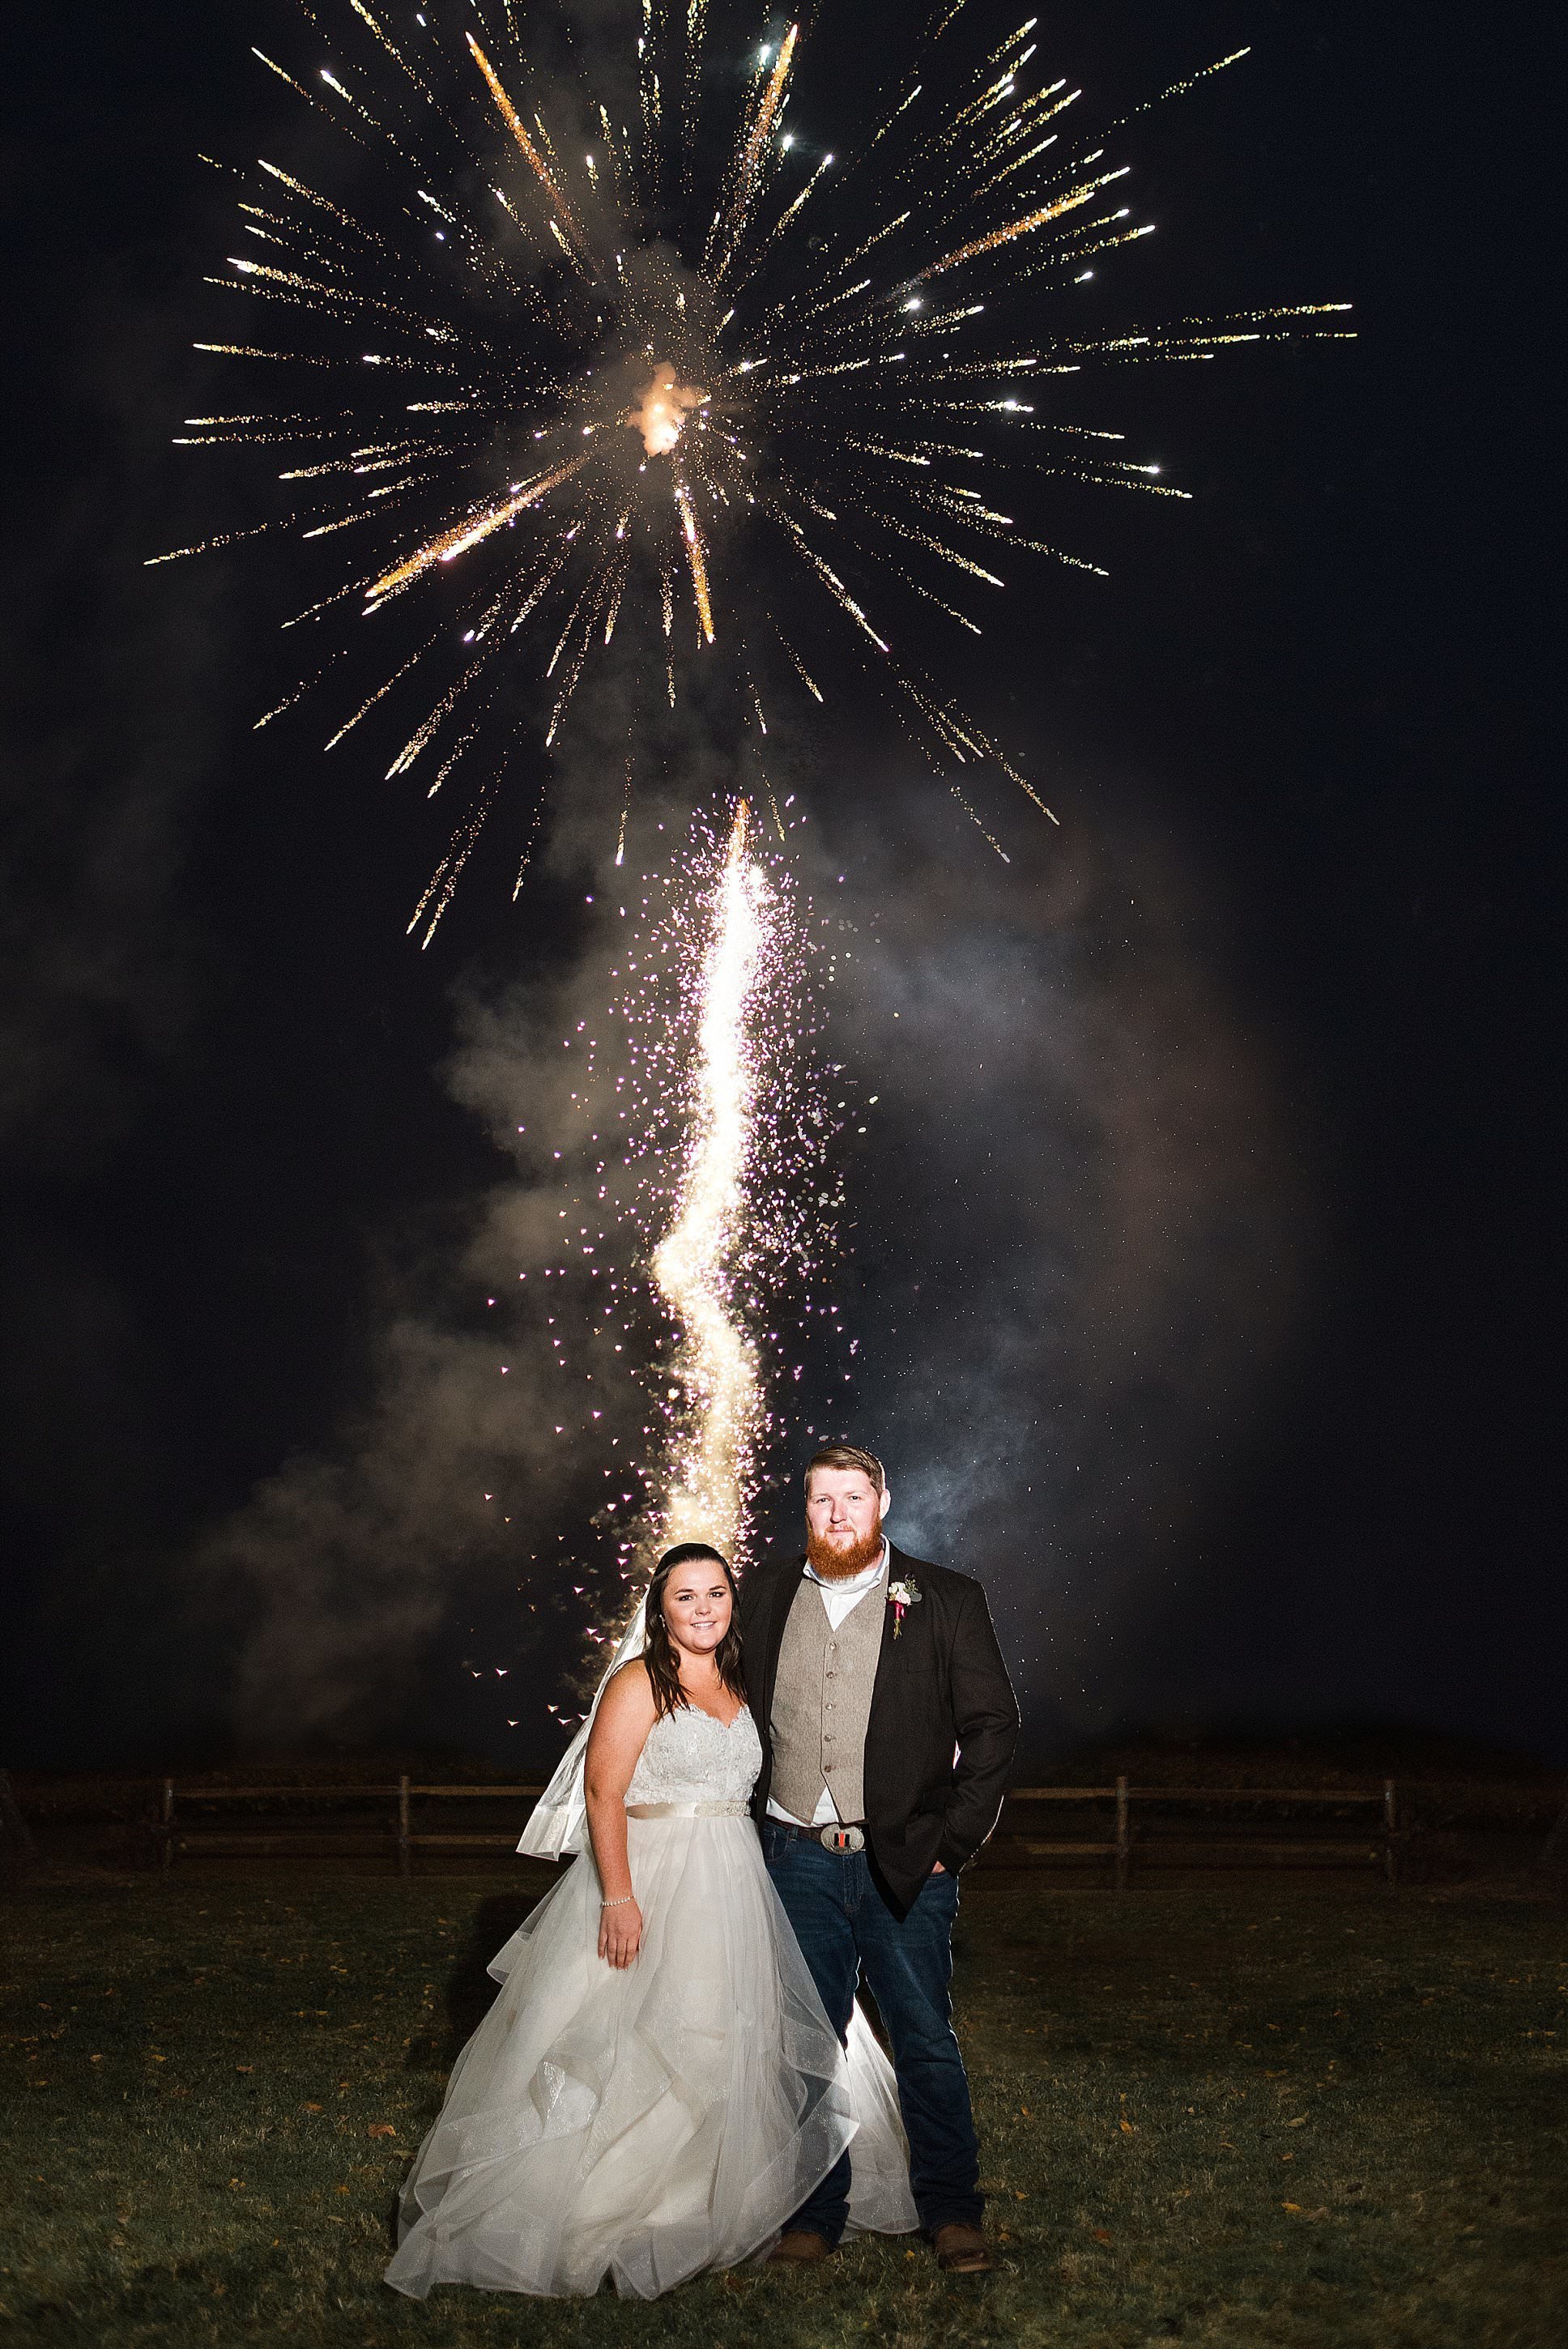 Bride and Groom standing in a field at night while they surprise their guests with a fireworks show